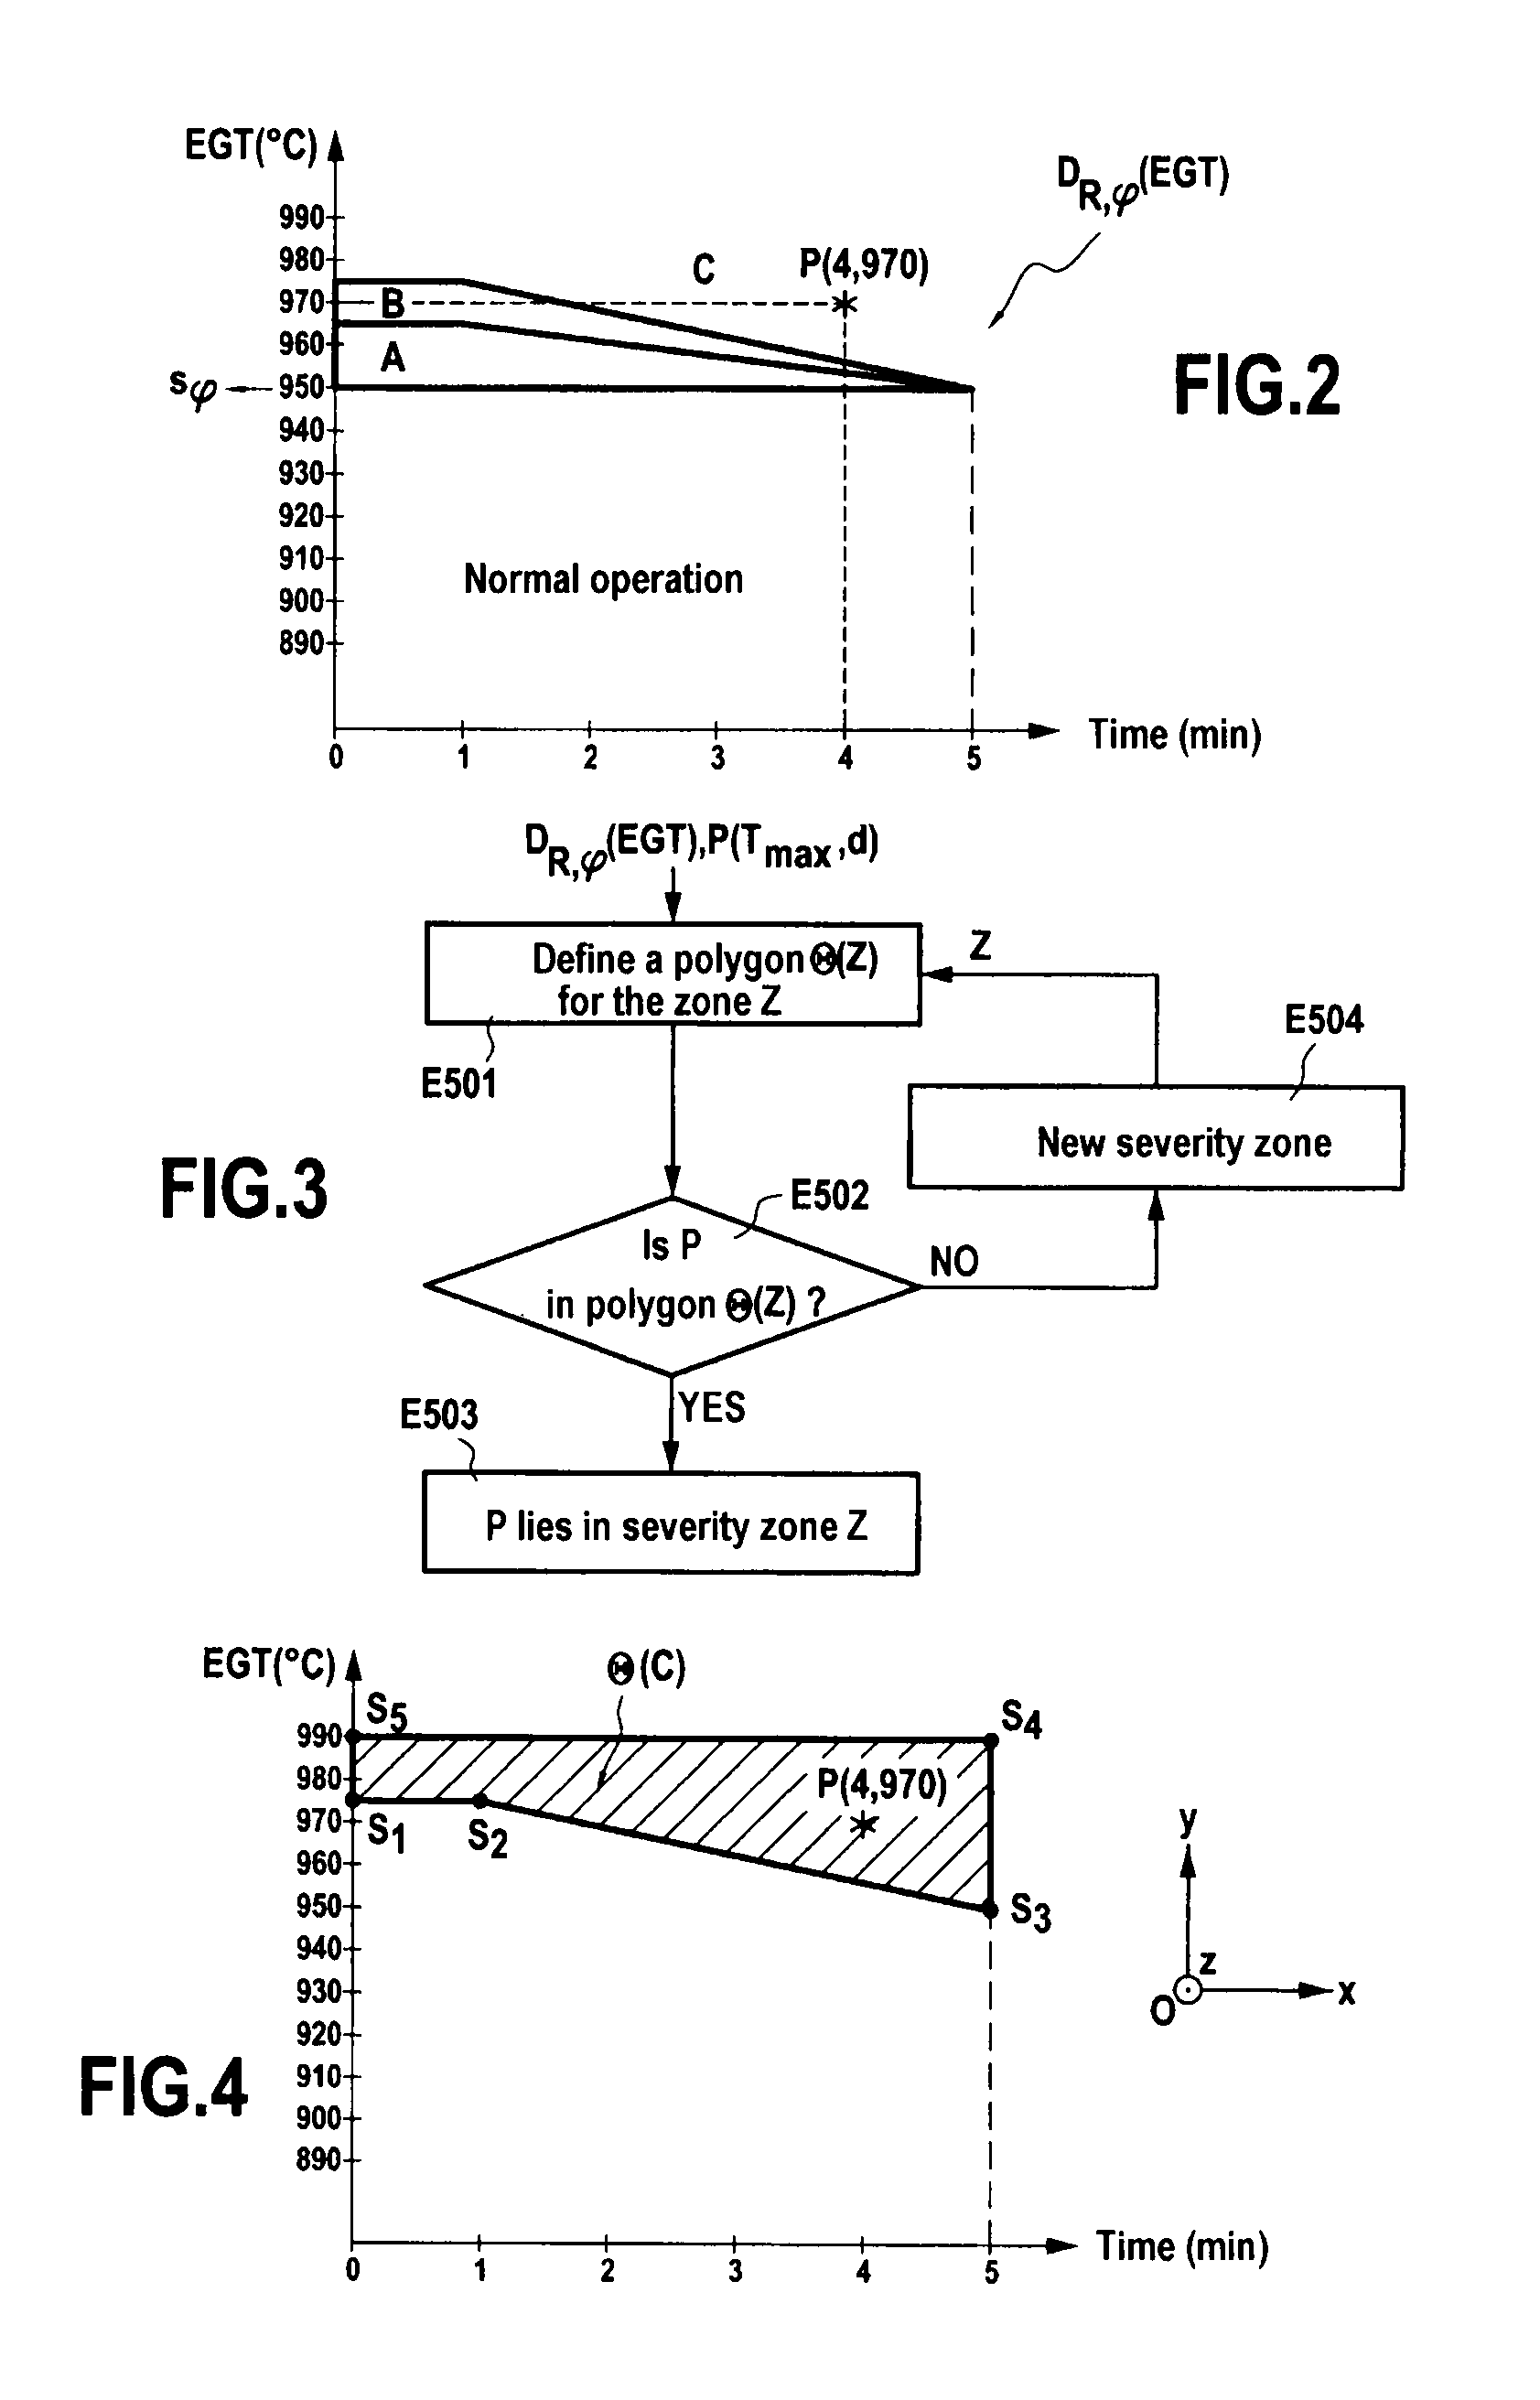 Method and a system for characterizing and counting violations of a threshold by an aircraft engine operating parameter